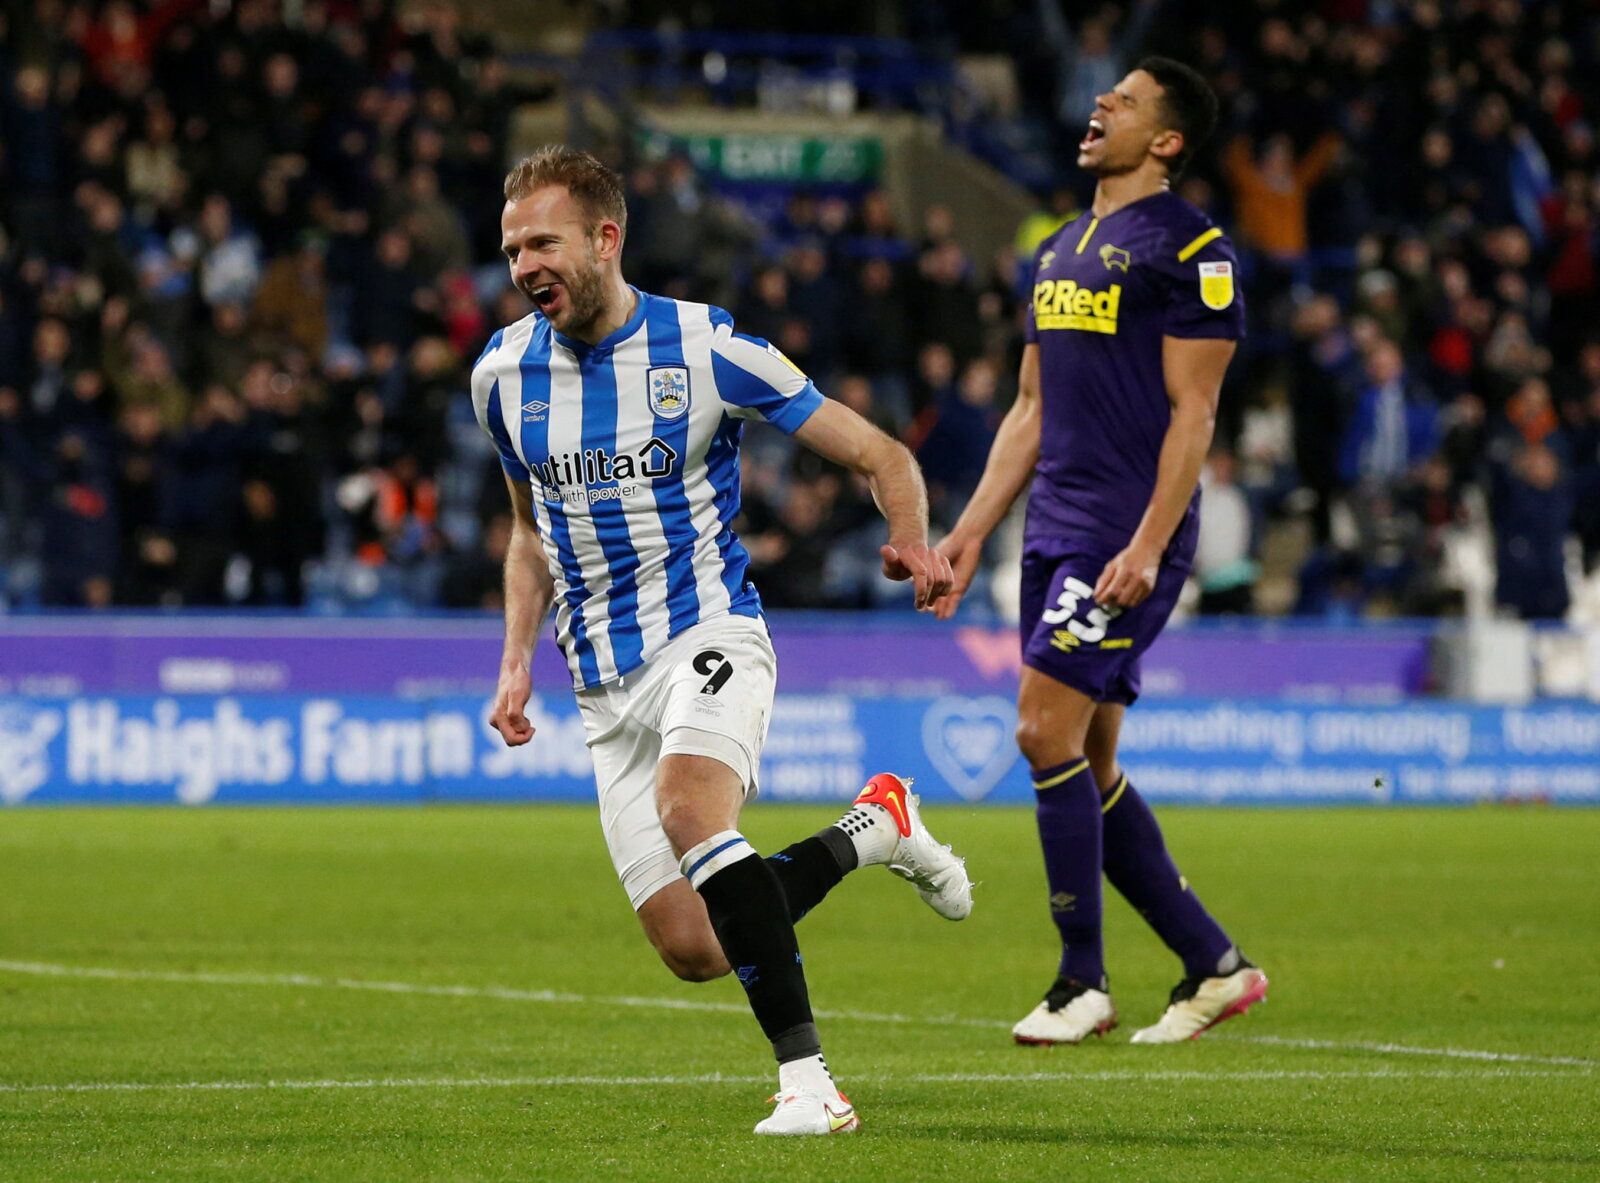 Soccer Football - Championship - Huddersfield Town v Derby County - John Smith's Stadium, Huddersfield, Britain - February 2, 2022 Huddersfield Town's Jordan Rhodes celebrates scoring their second goal   Action Images/Ed Sykes EDITORIAL USE ONLY. No use with unauthorized audio, video, data, fixture lists, club/league logos or 'live' services. Online in-match use limited to 75 images, no video emulation. No use in betting, games or single club /league/player publications. Please contact your acco